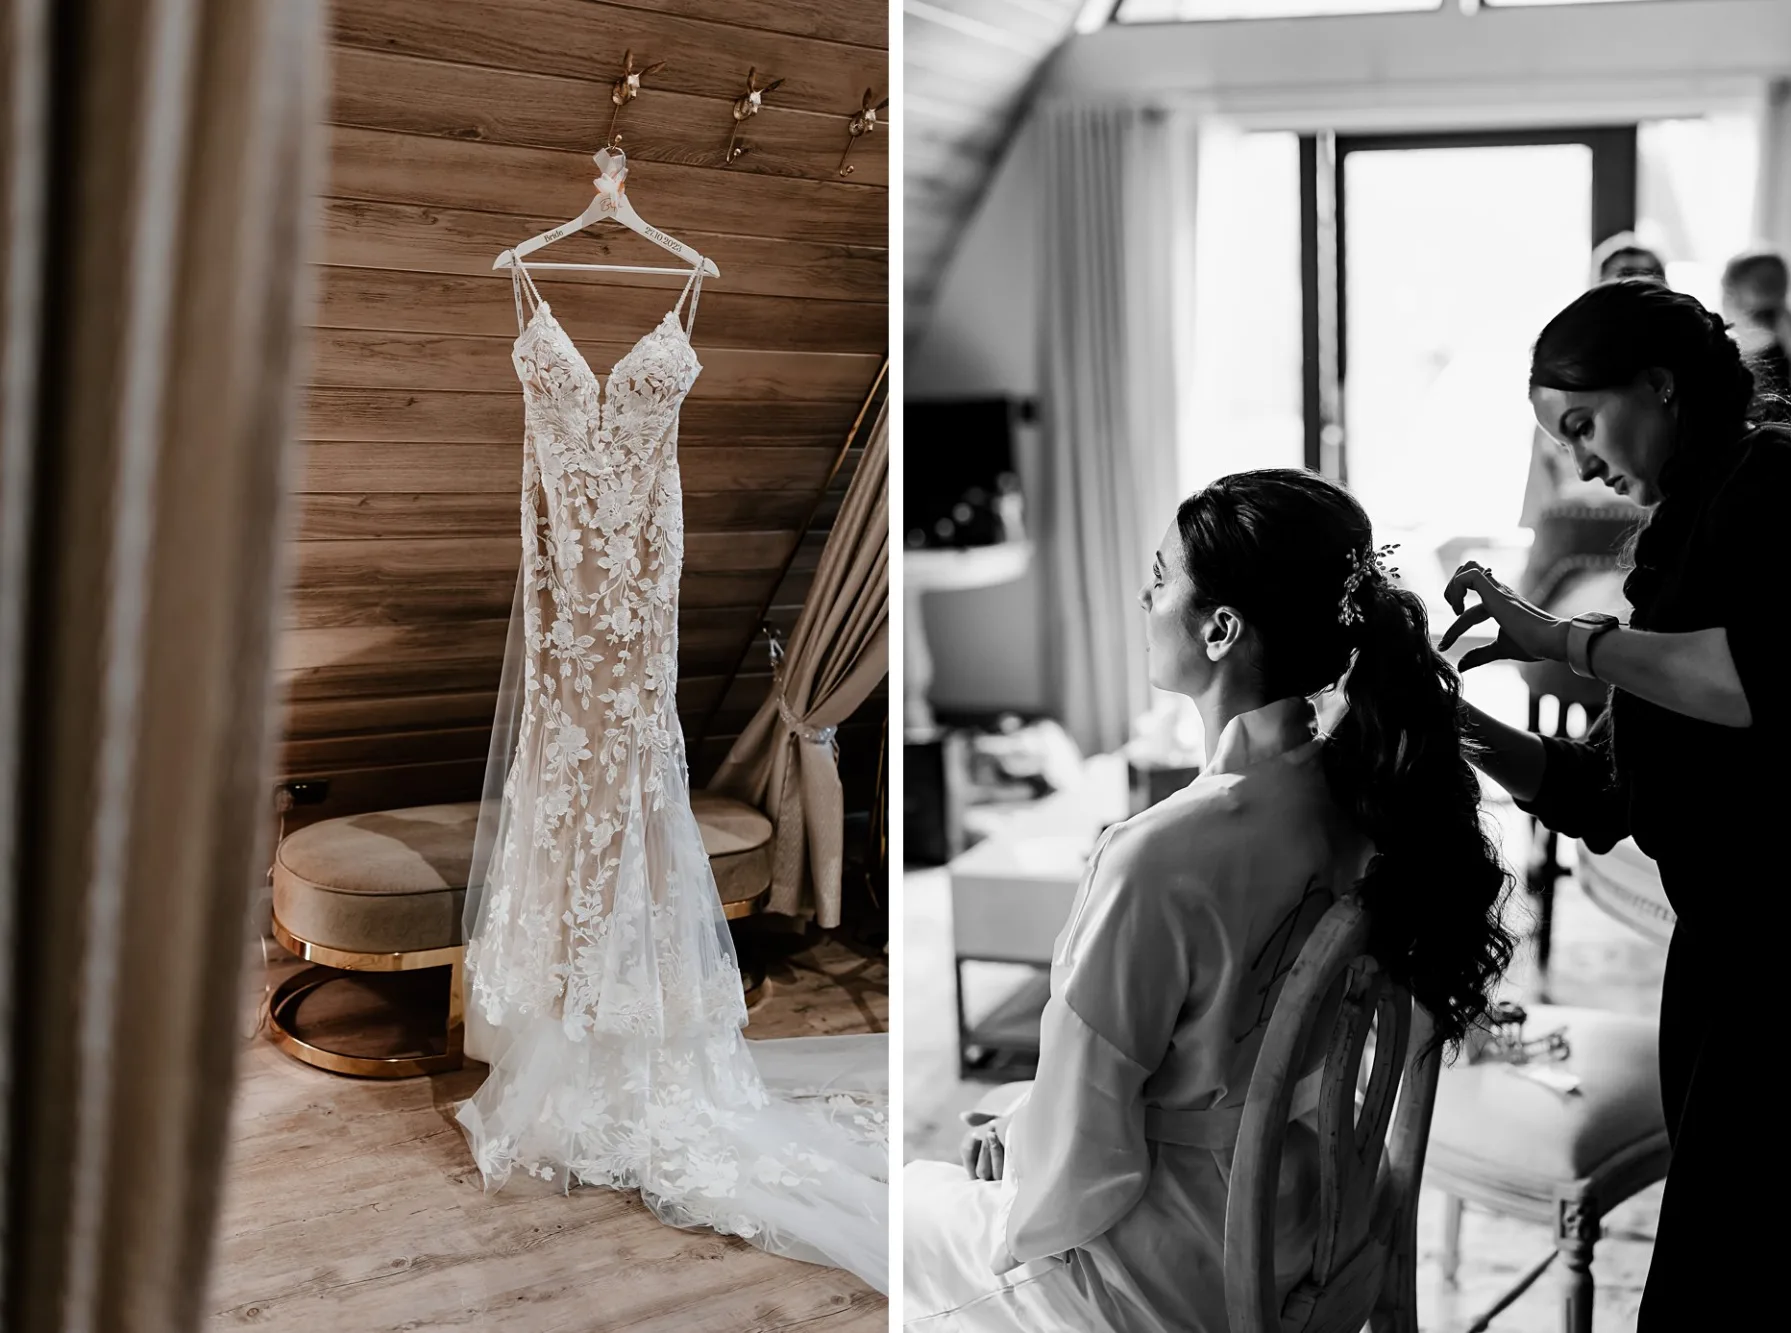 Bridal preparations and details at the luxury lodges at Oaklands Driffield. Photo one shows a brides wedding dress hung up. Photo two shows a hairdresser fixing the brides hair which is styled in a ponytail.